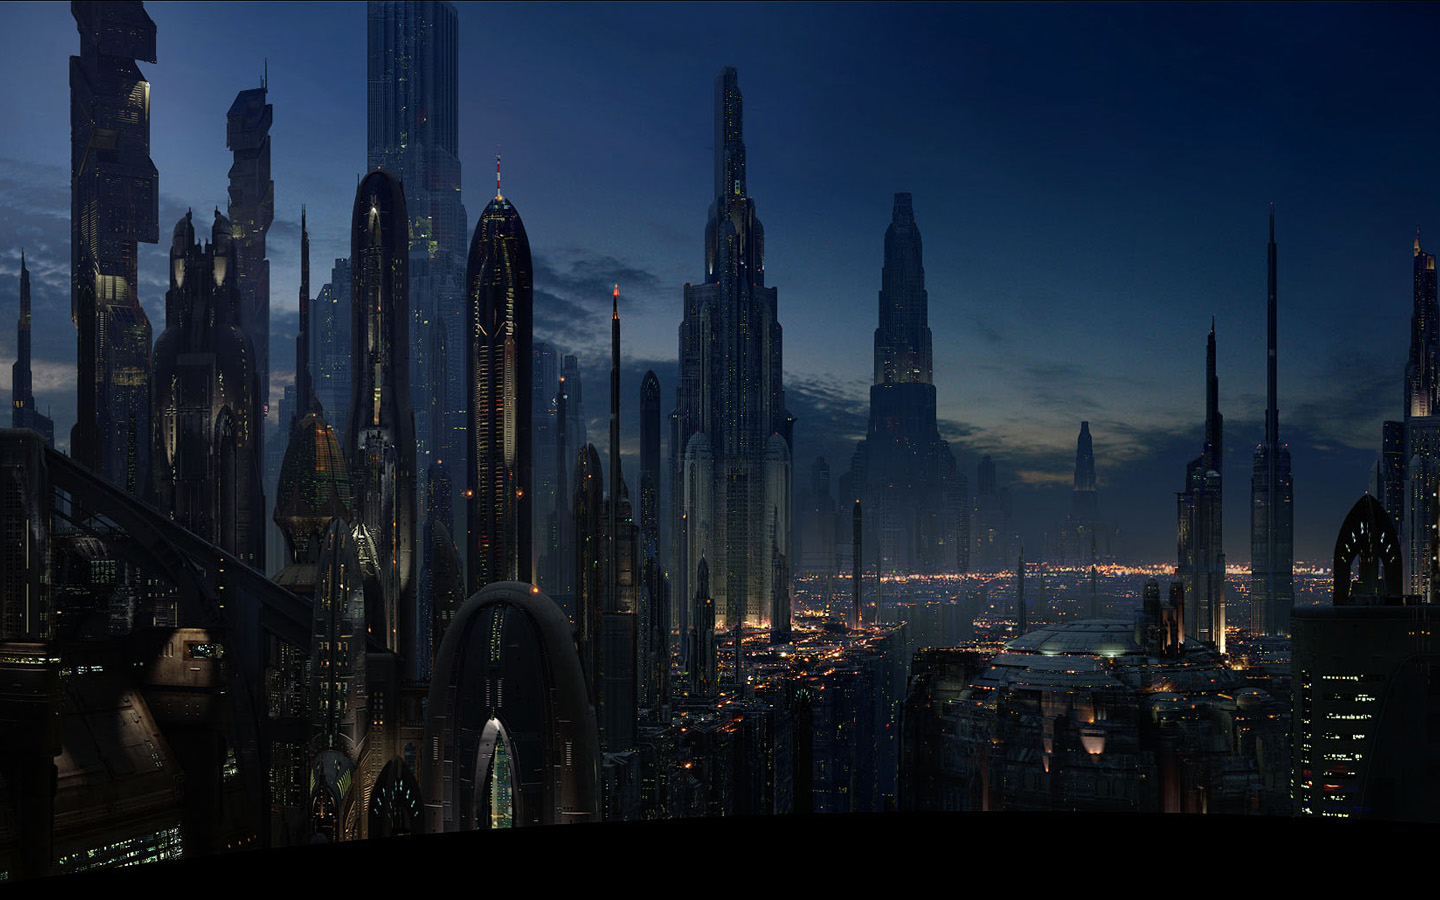 star wars, night, skyscraper, building, movie, city wallpapers for tablet